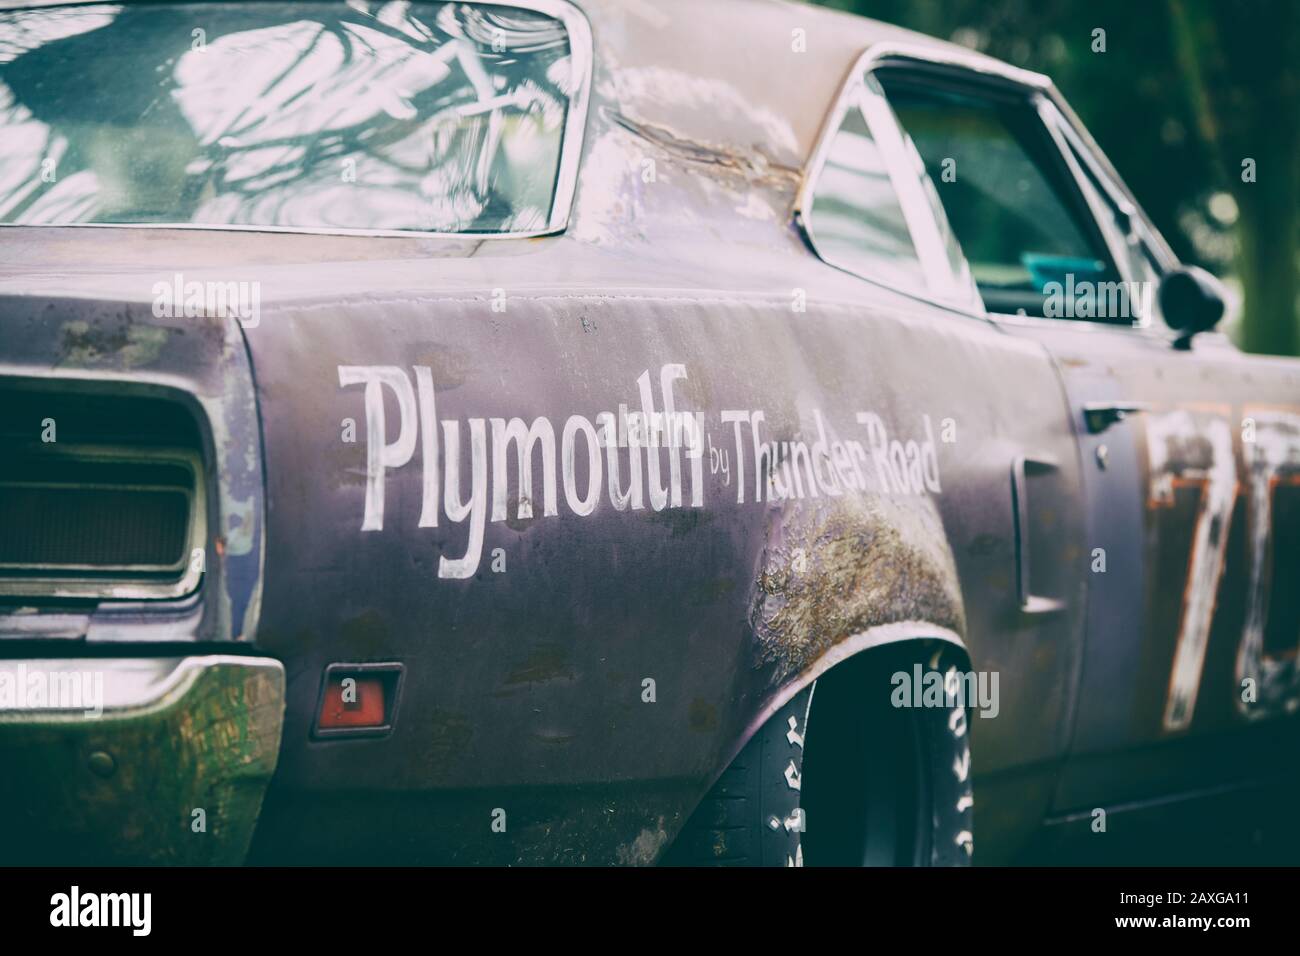 1970 Plymouth muscle car at Bicester heritage centre sunday scramble event. Bicester, Oxfordshire, England. Vintage filter applied Stock Photo